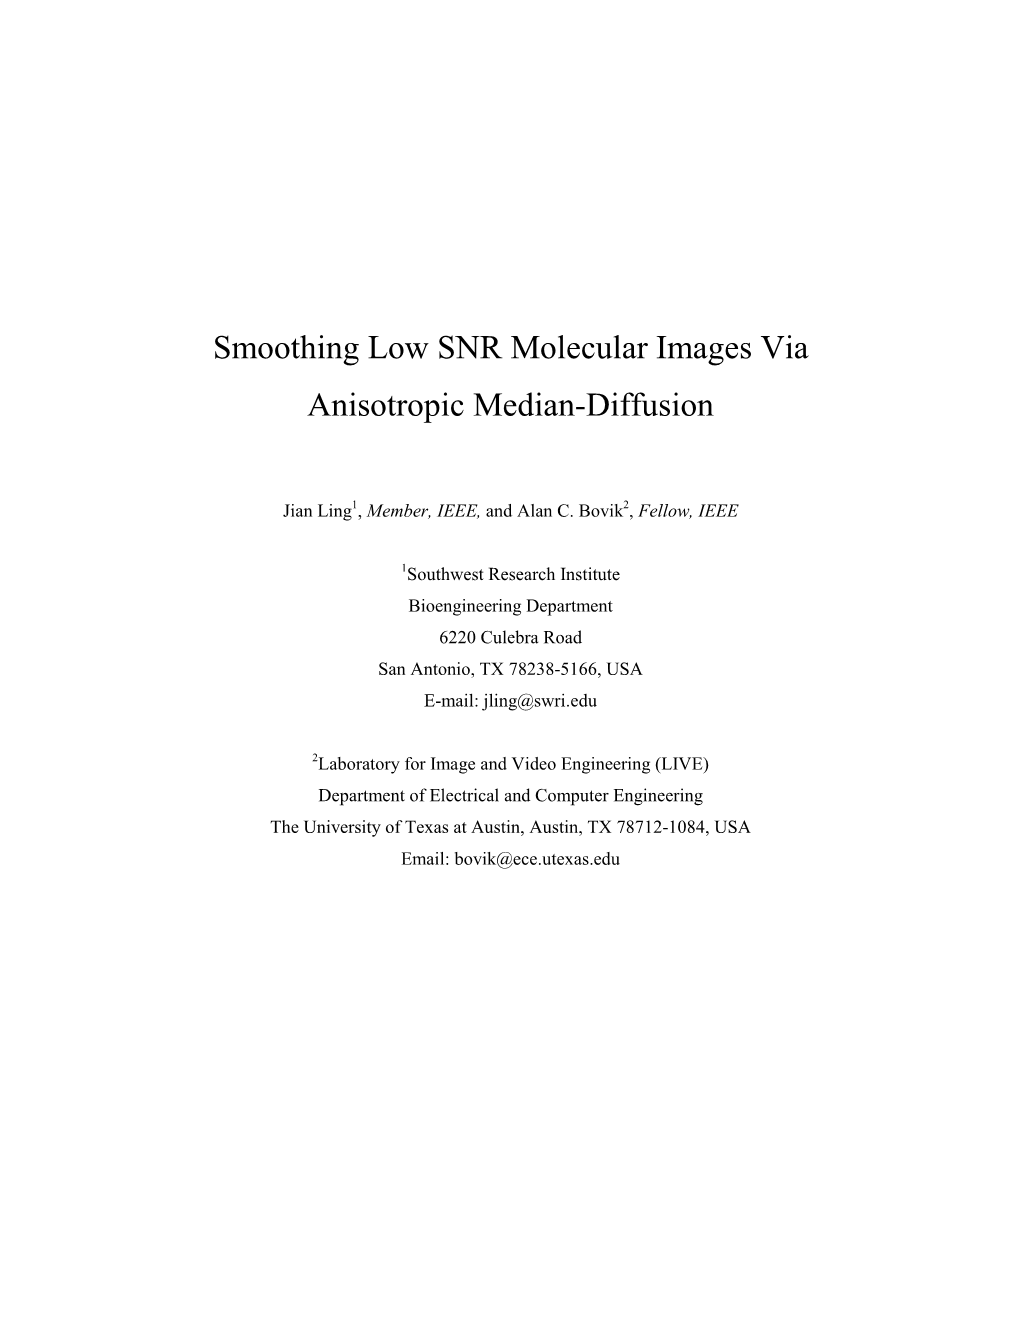 Smoothing Low SNR Molecular Images Via Anisotropic Median-Diffusion